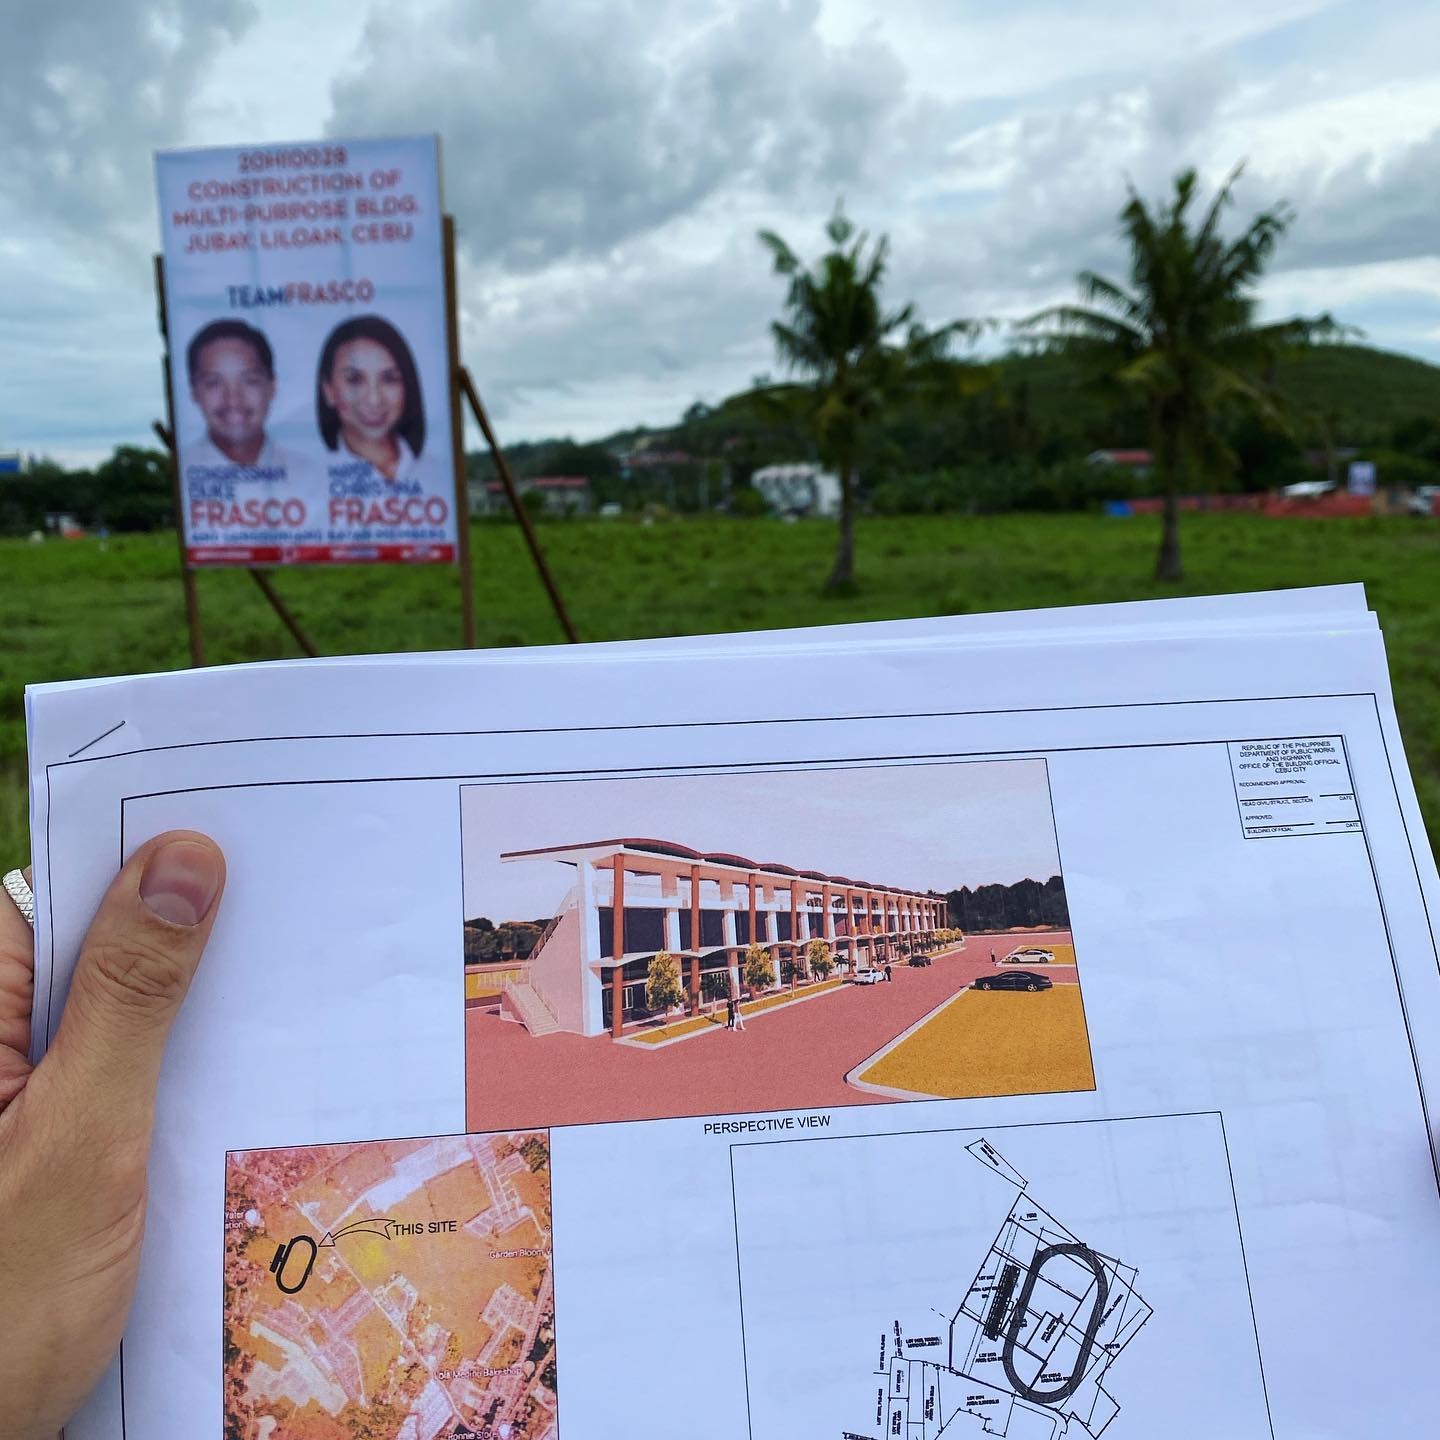 Fifth District Representative Duke Frasco showed on his Facebook page the artist perspective of the Olympic-track oval and pool, which will be built in Liloan town alongside the establishment of a CTU Campus in the area.(Photo courtesy Duke Frasco Facebook page)